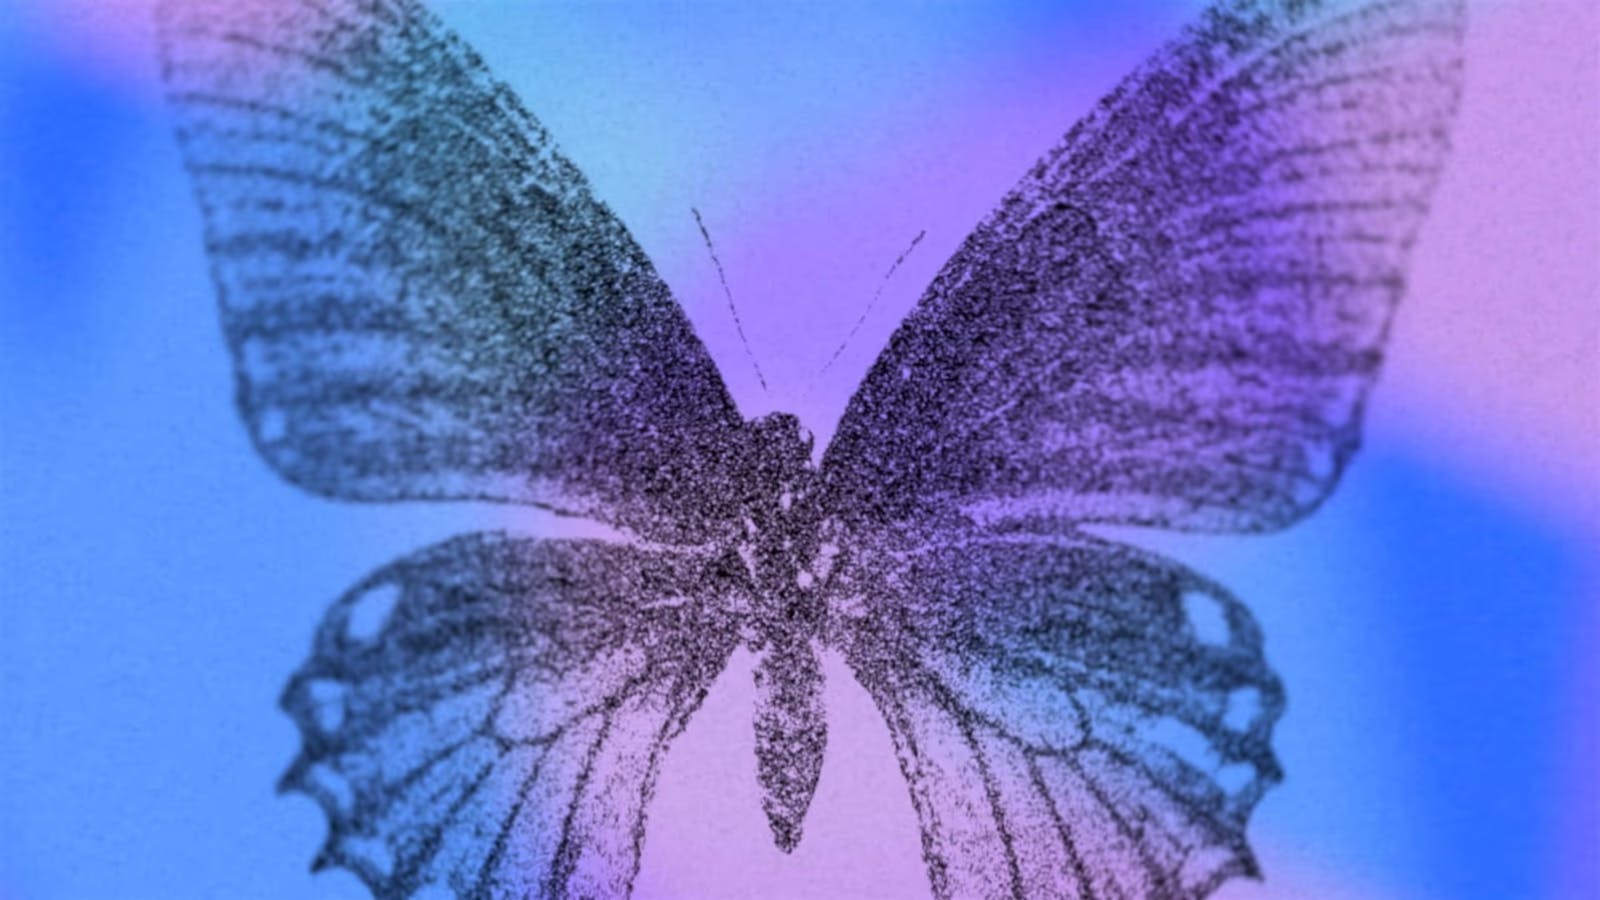 The Xanthopleura cover image, a stippled illustration of a moth on a blue and purple bakcground